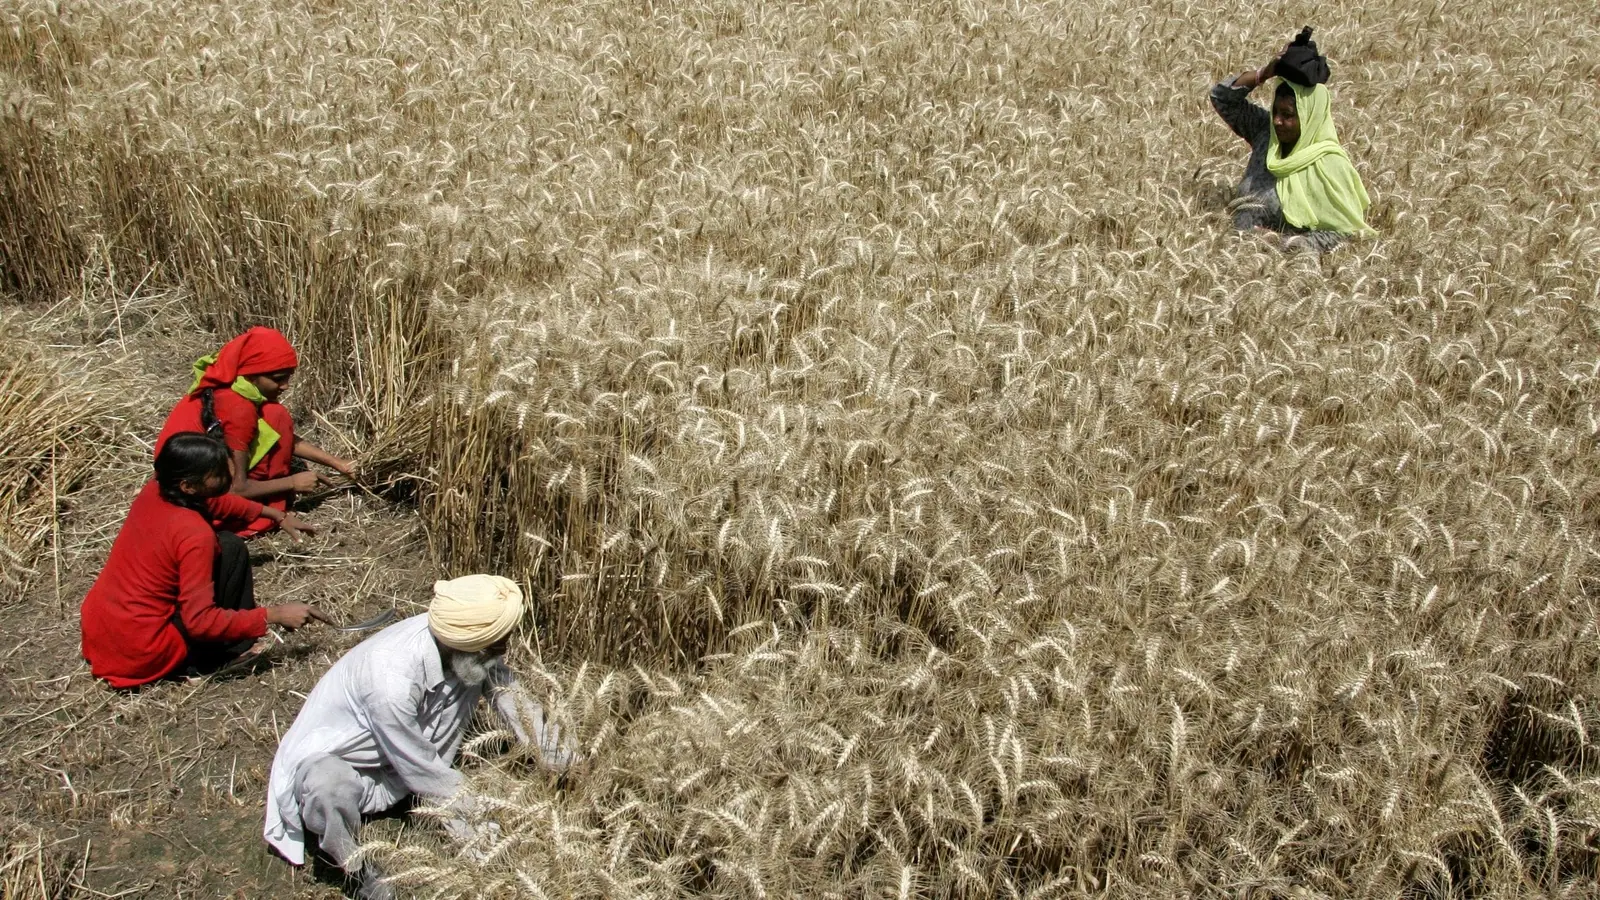 India acts to seize gap in wheat export market left by Ukraine war